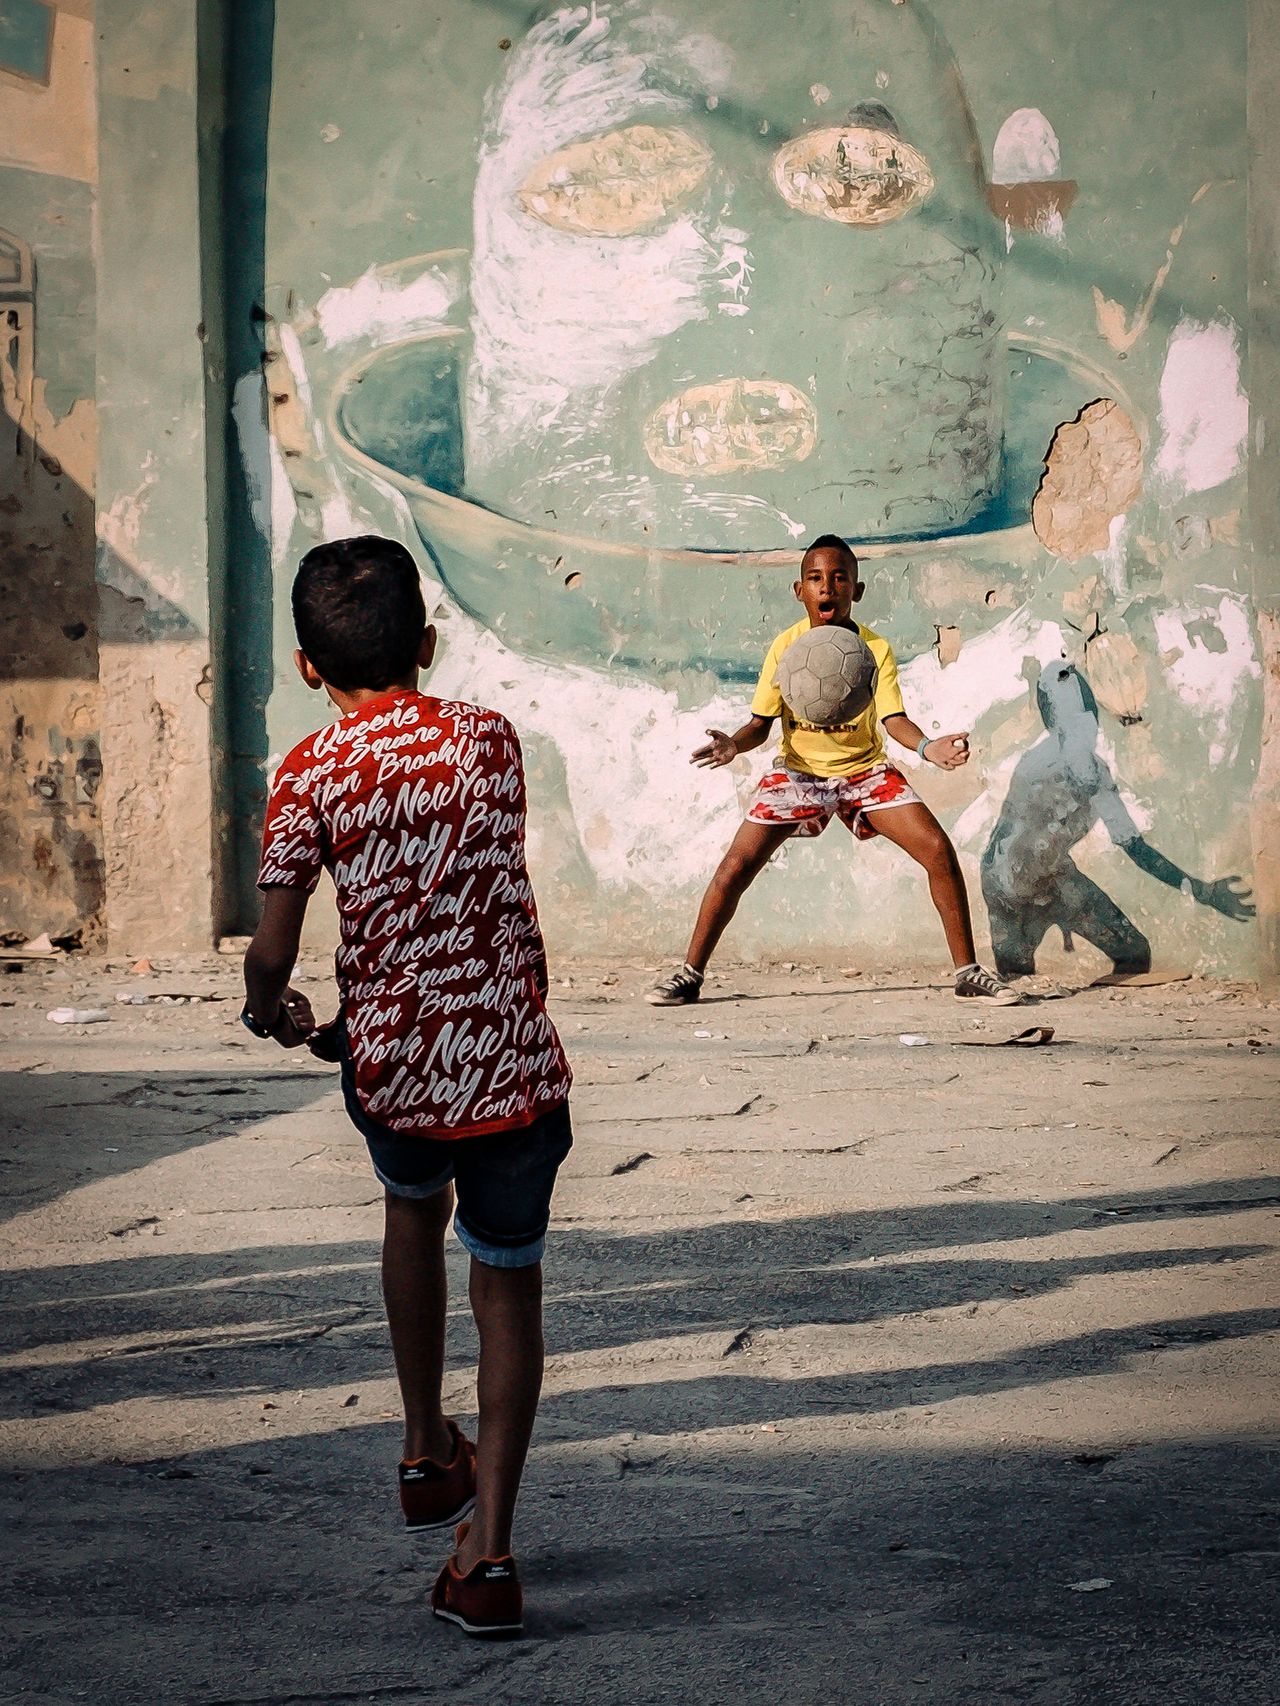 Sport category: Children play football in the street in Havana in this photograph